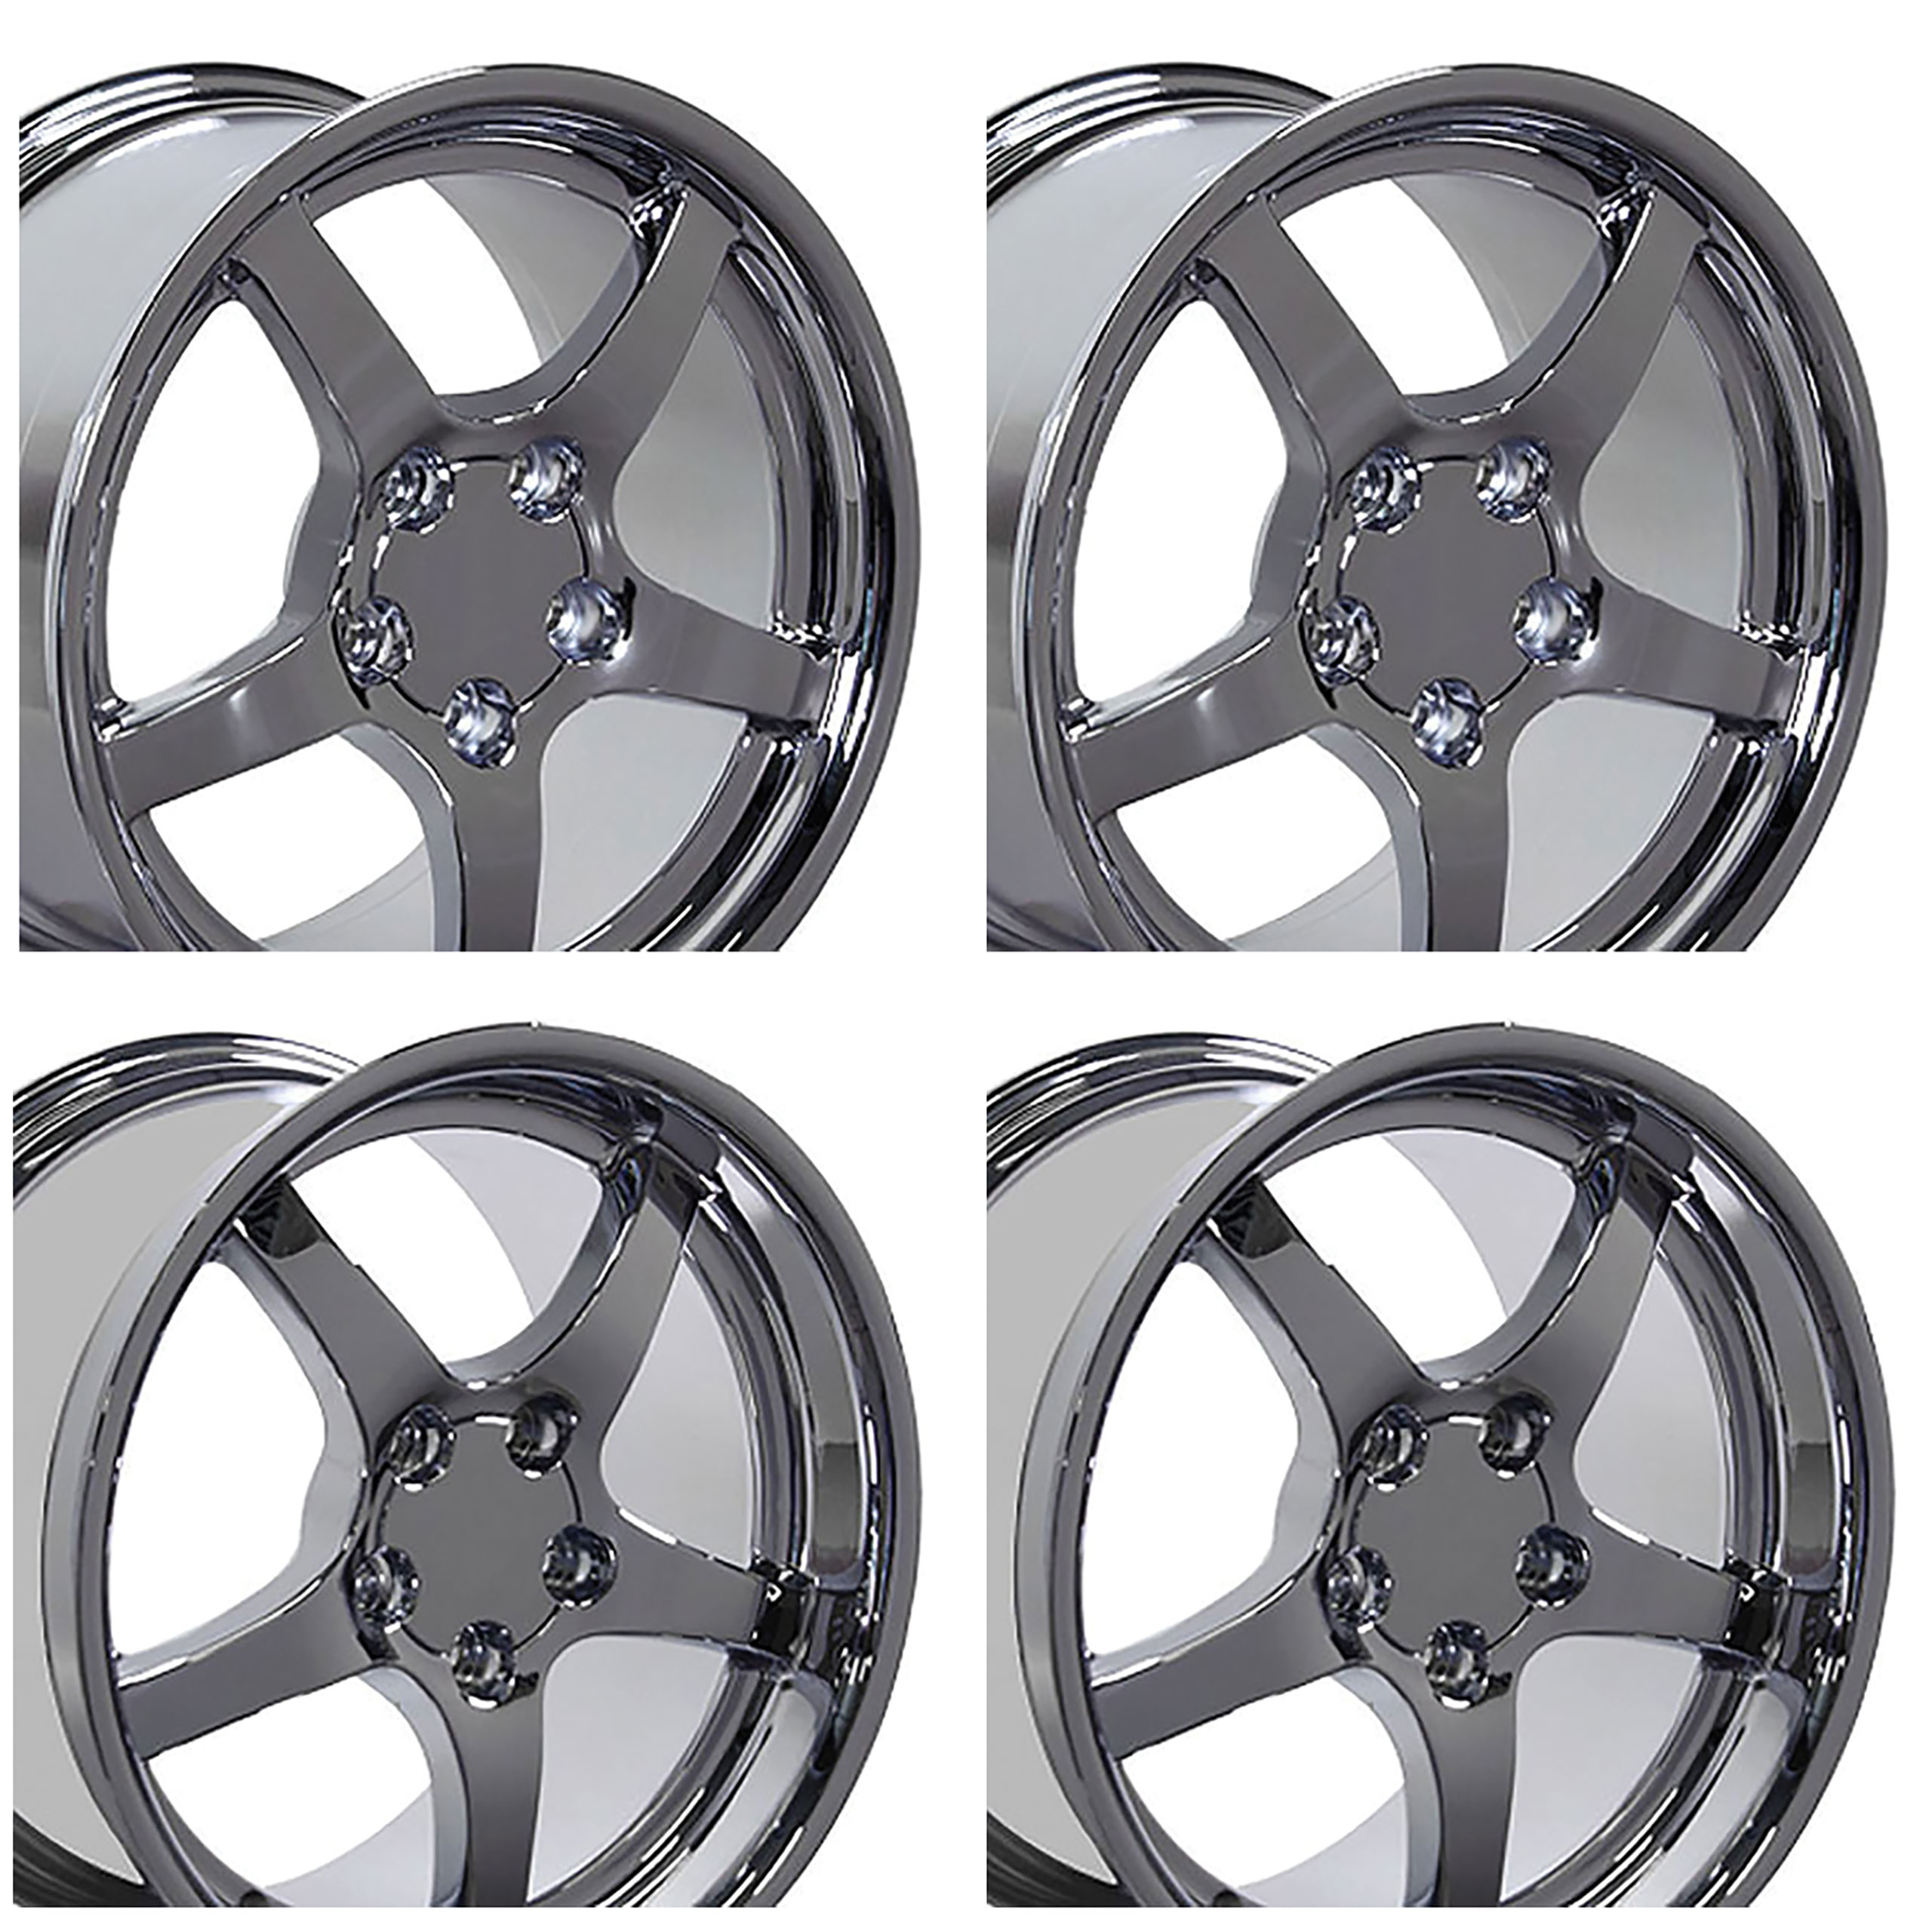 C5 Style Y2K Wheel Set Chrome Staggered Deep Dish Wide Upgrade For 1988-04 Corvette